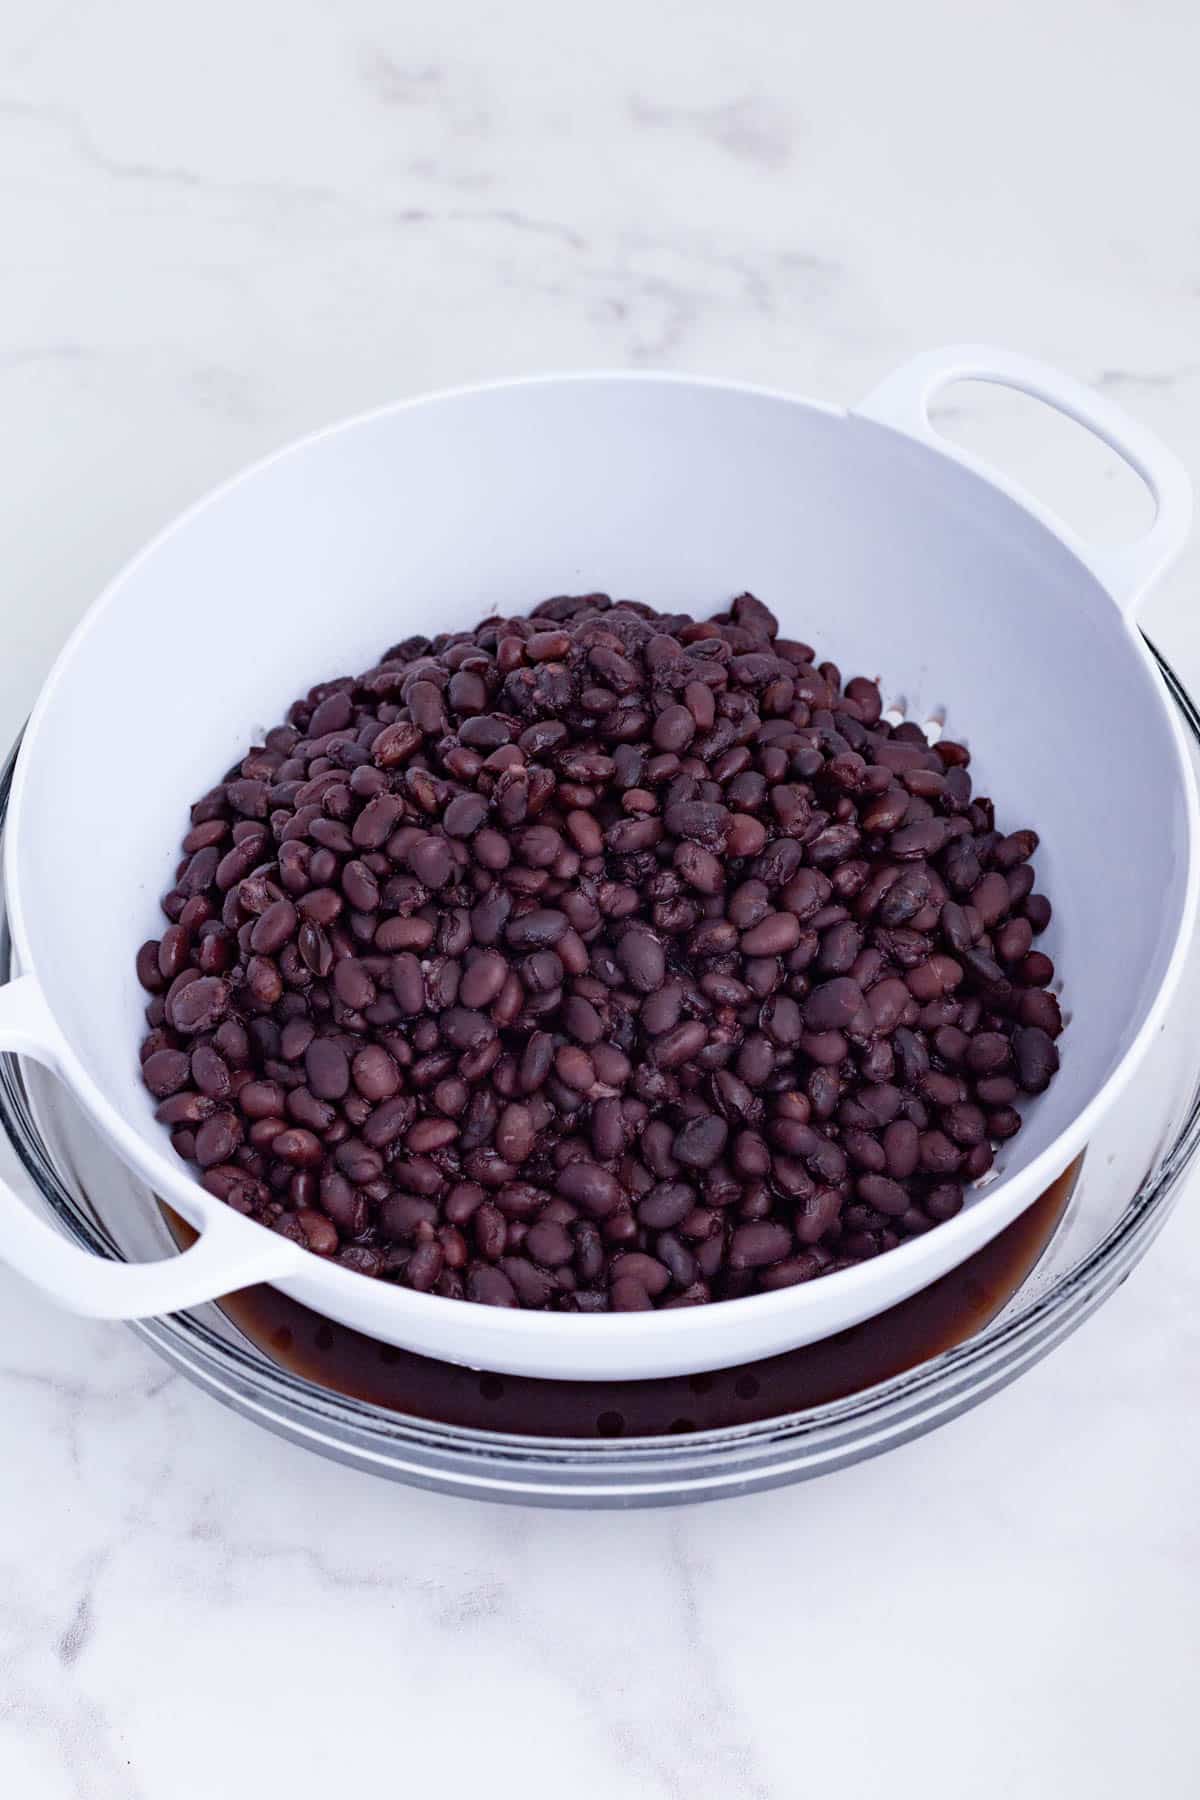 Cooked black beans are drained in a colander.